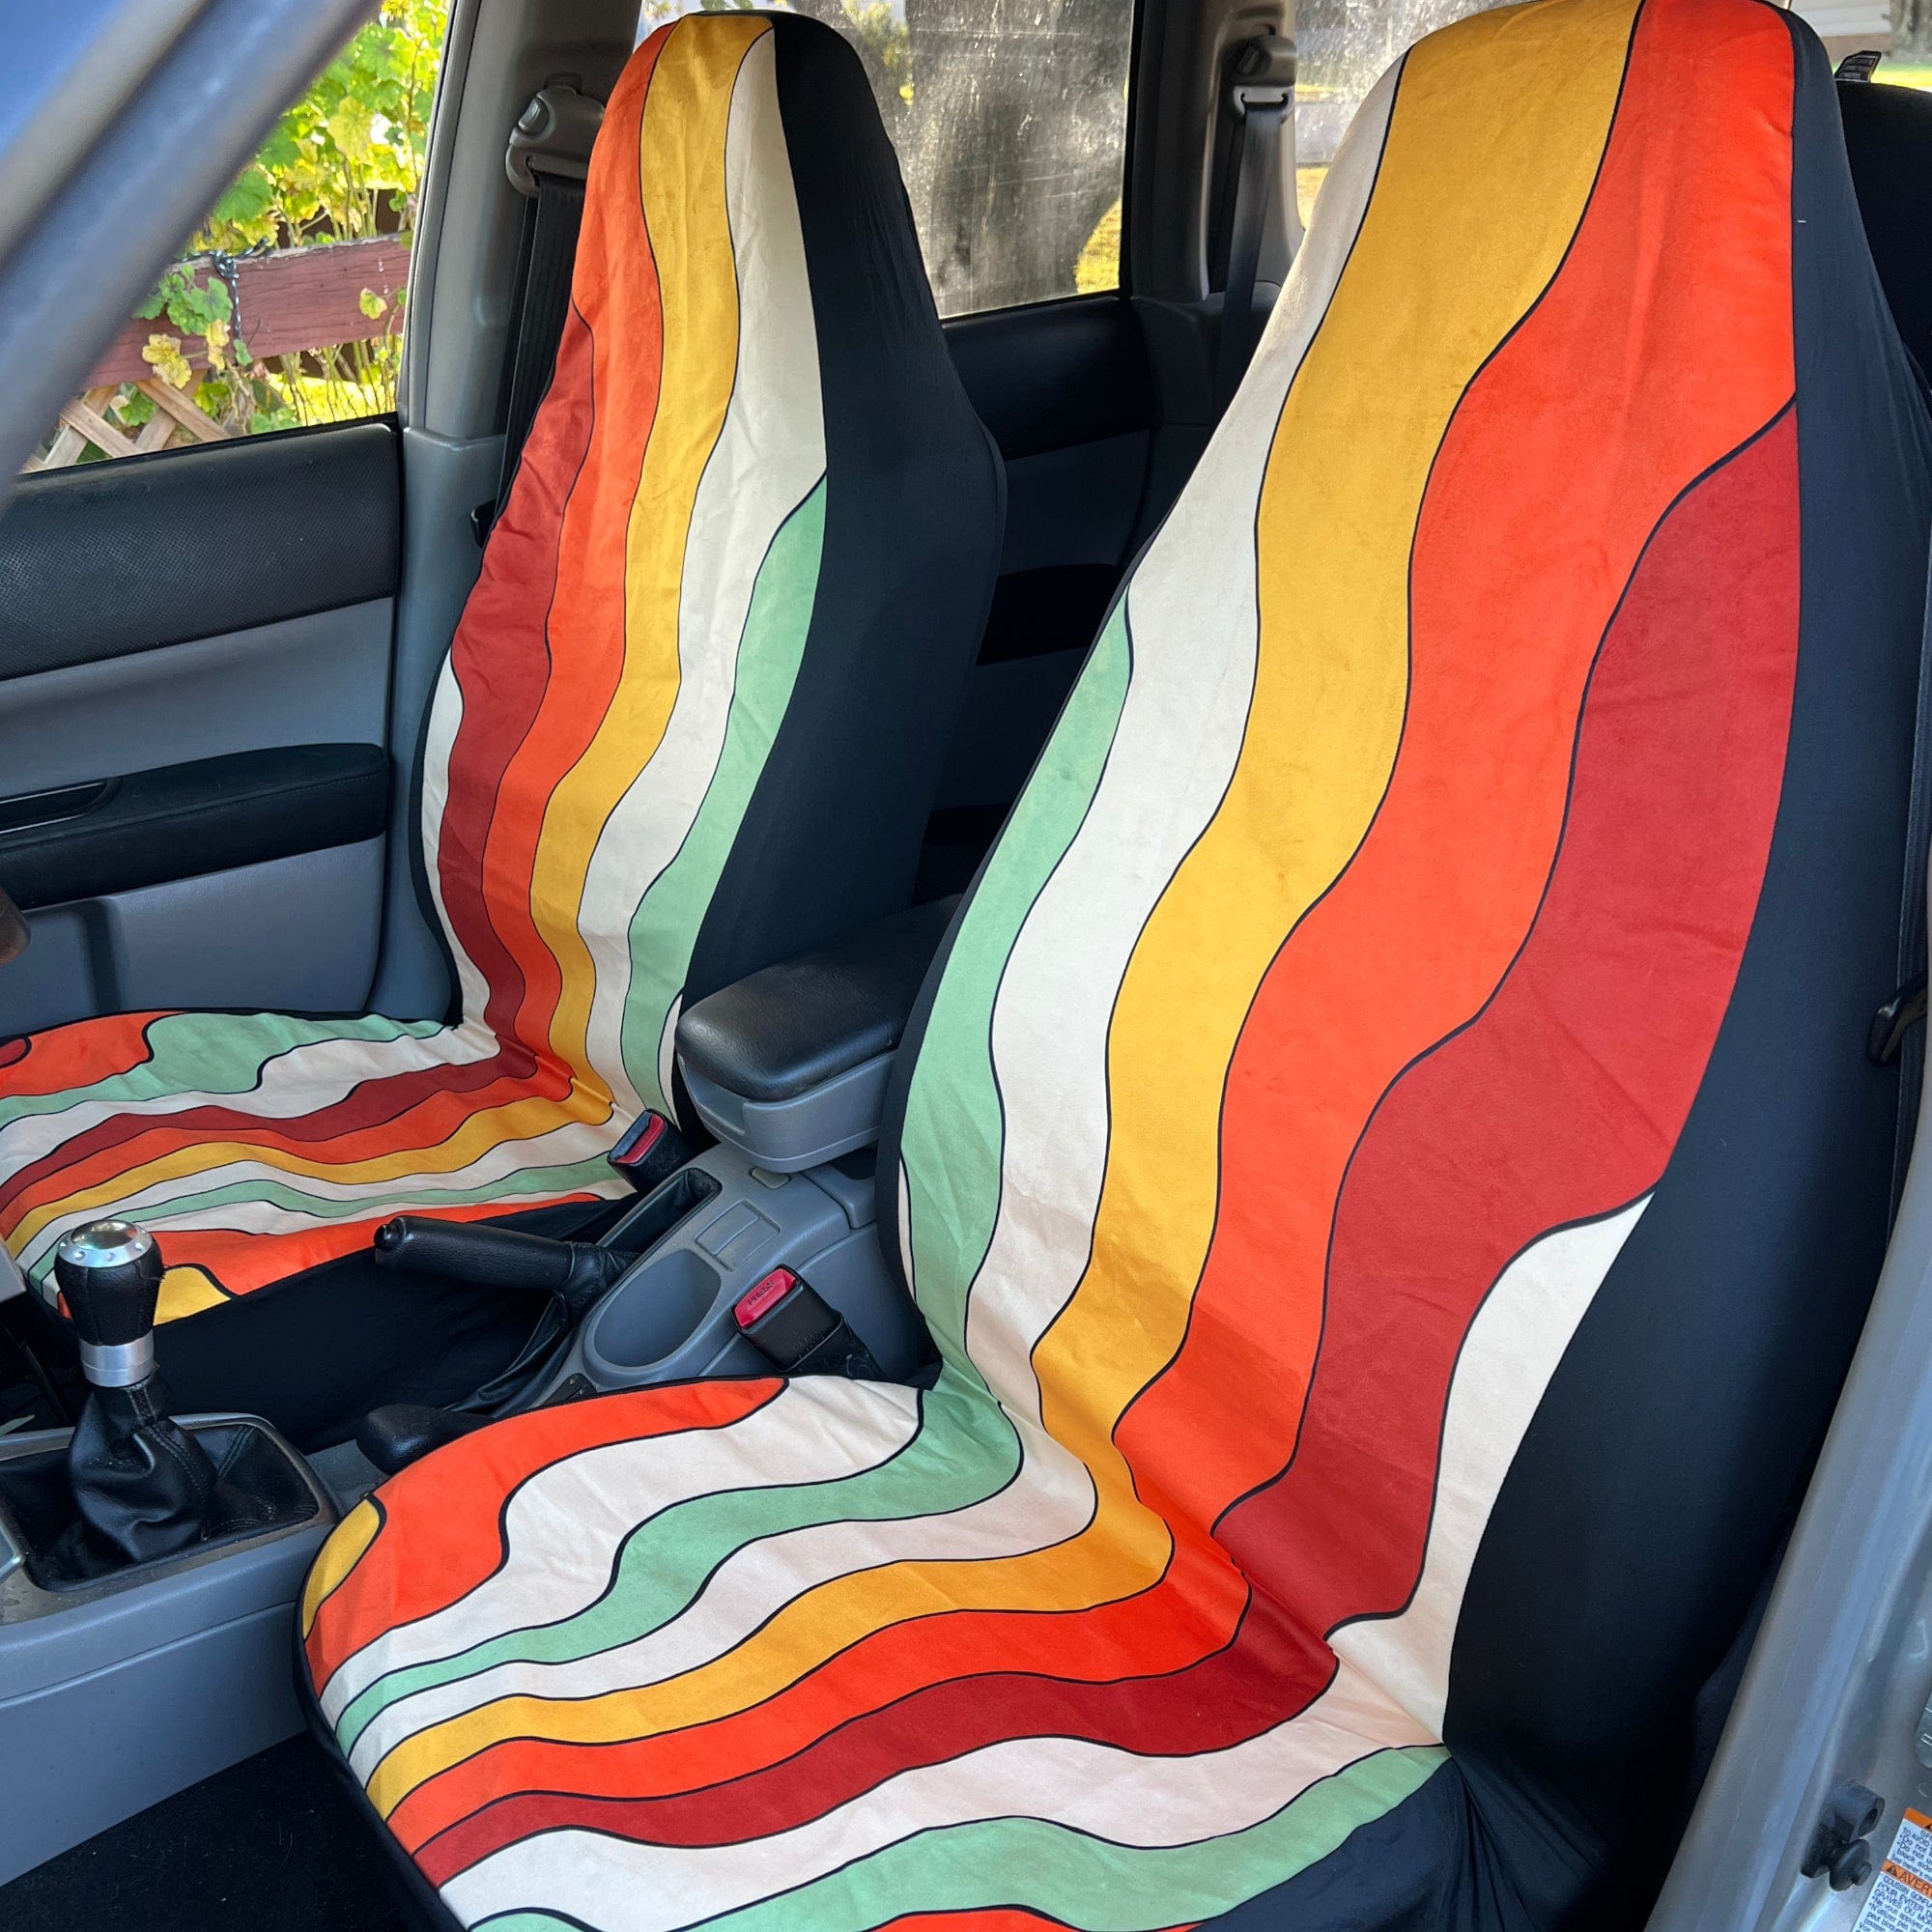 Groovy Flower Car Seat Covers for Vehicle 2 Pc Vintage Floral 